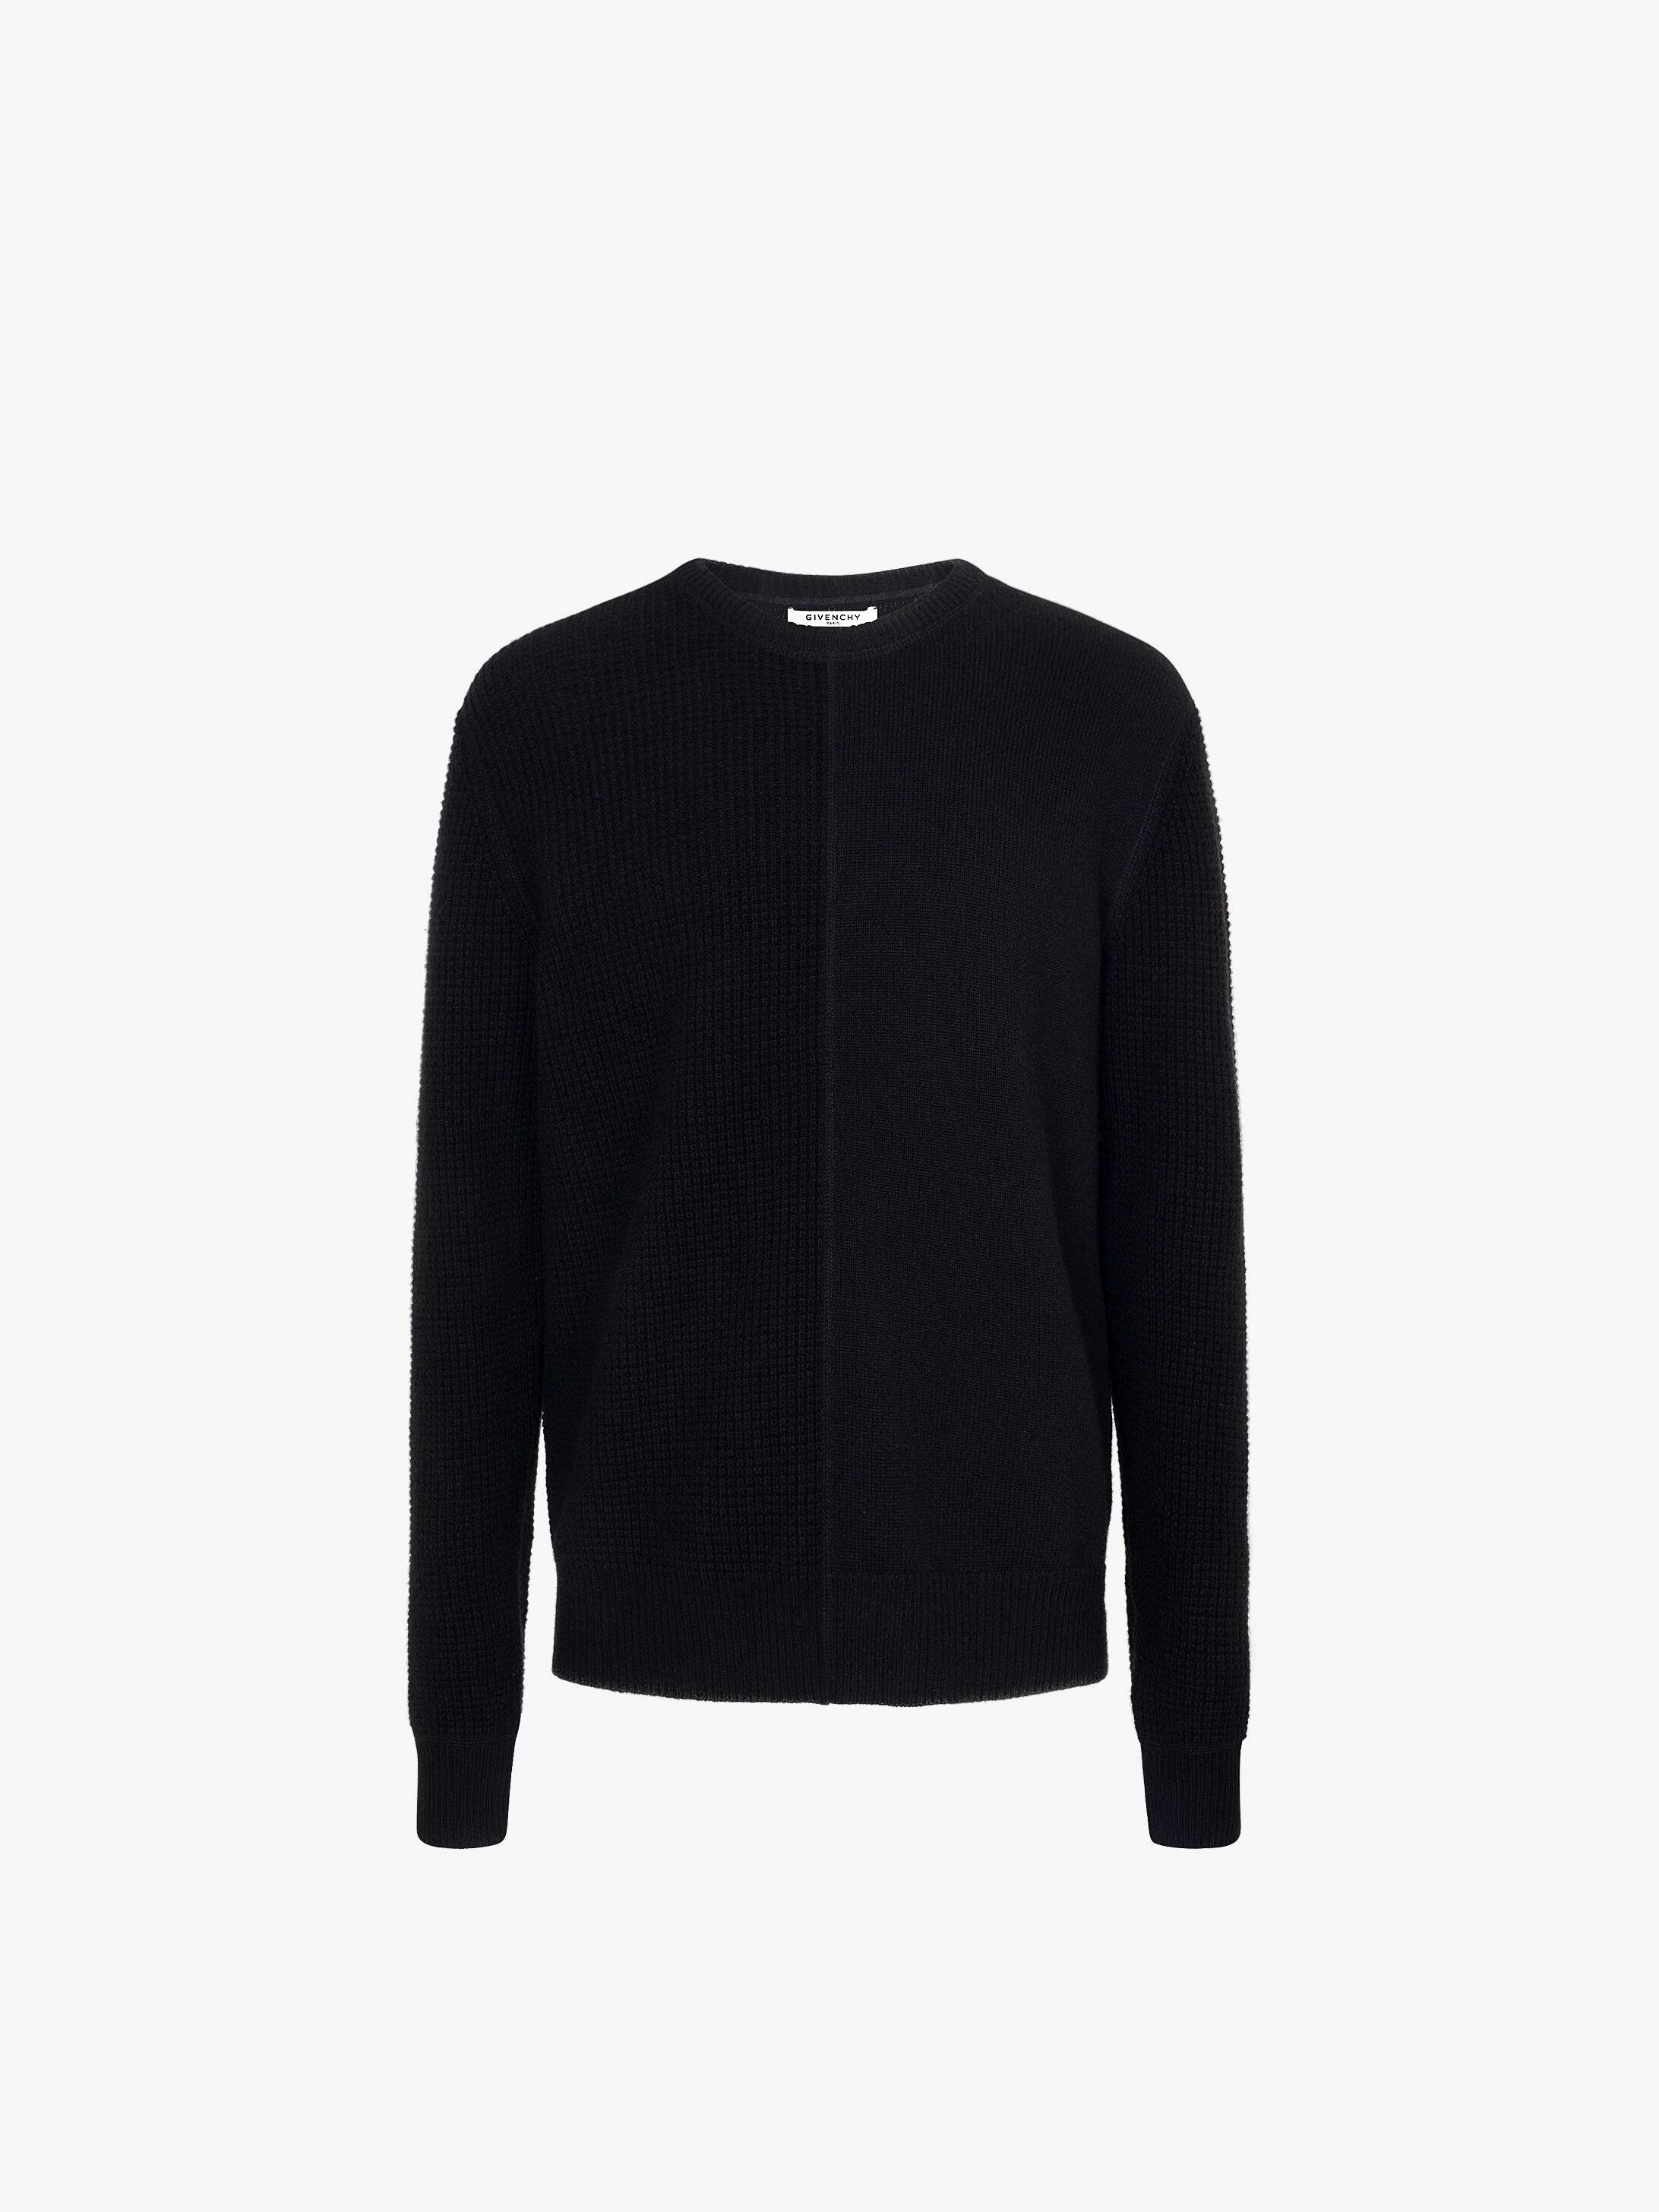 GIVENCHY PARIS embroidered sweater in cashmere | GIVENCHY Paris